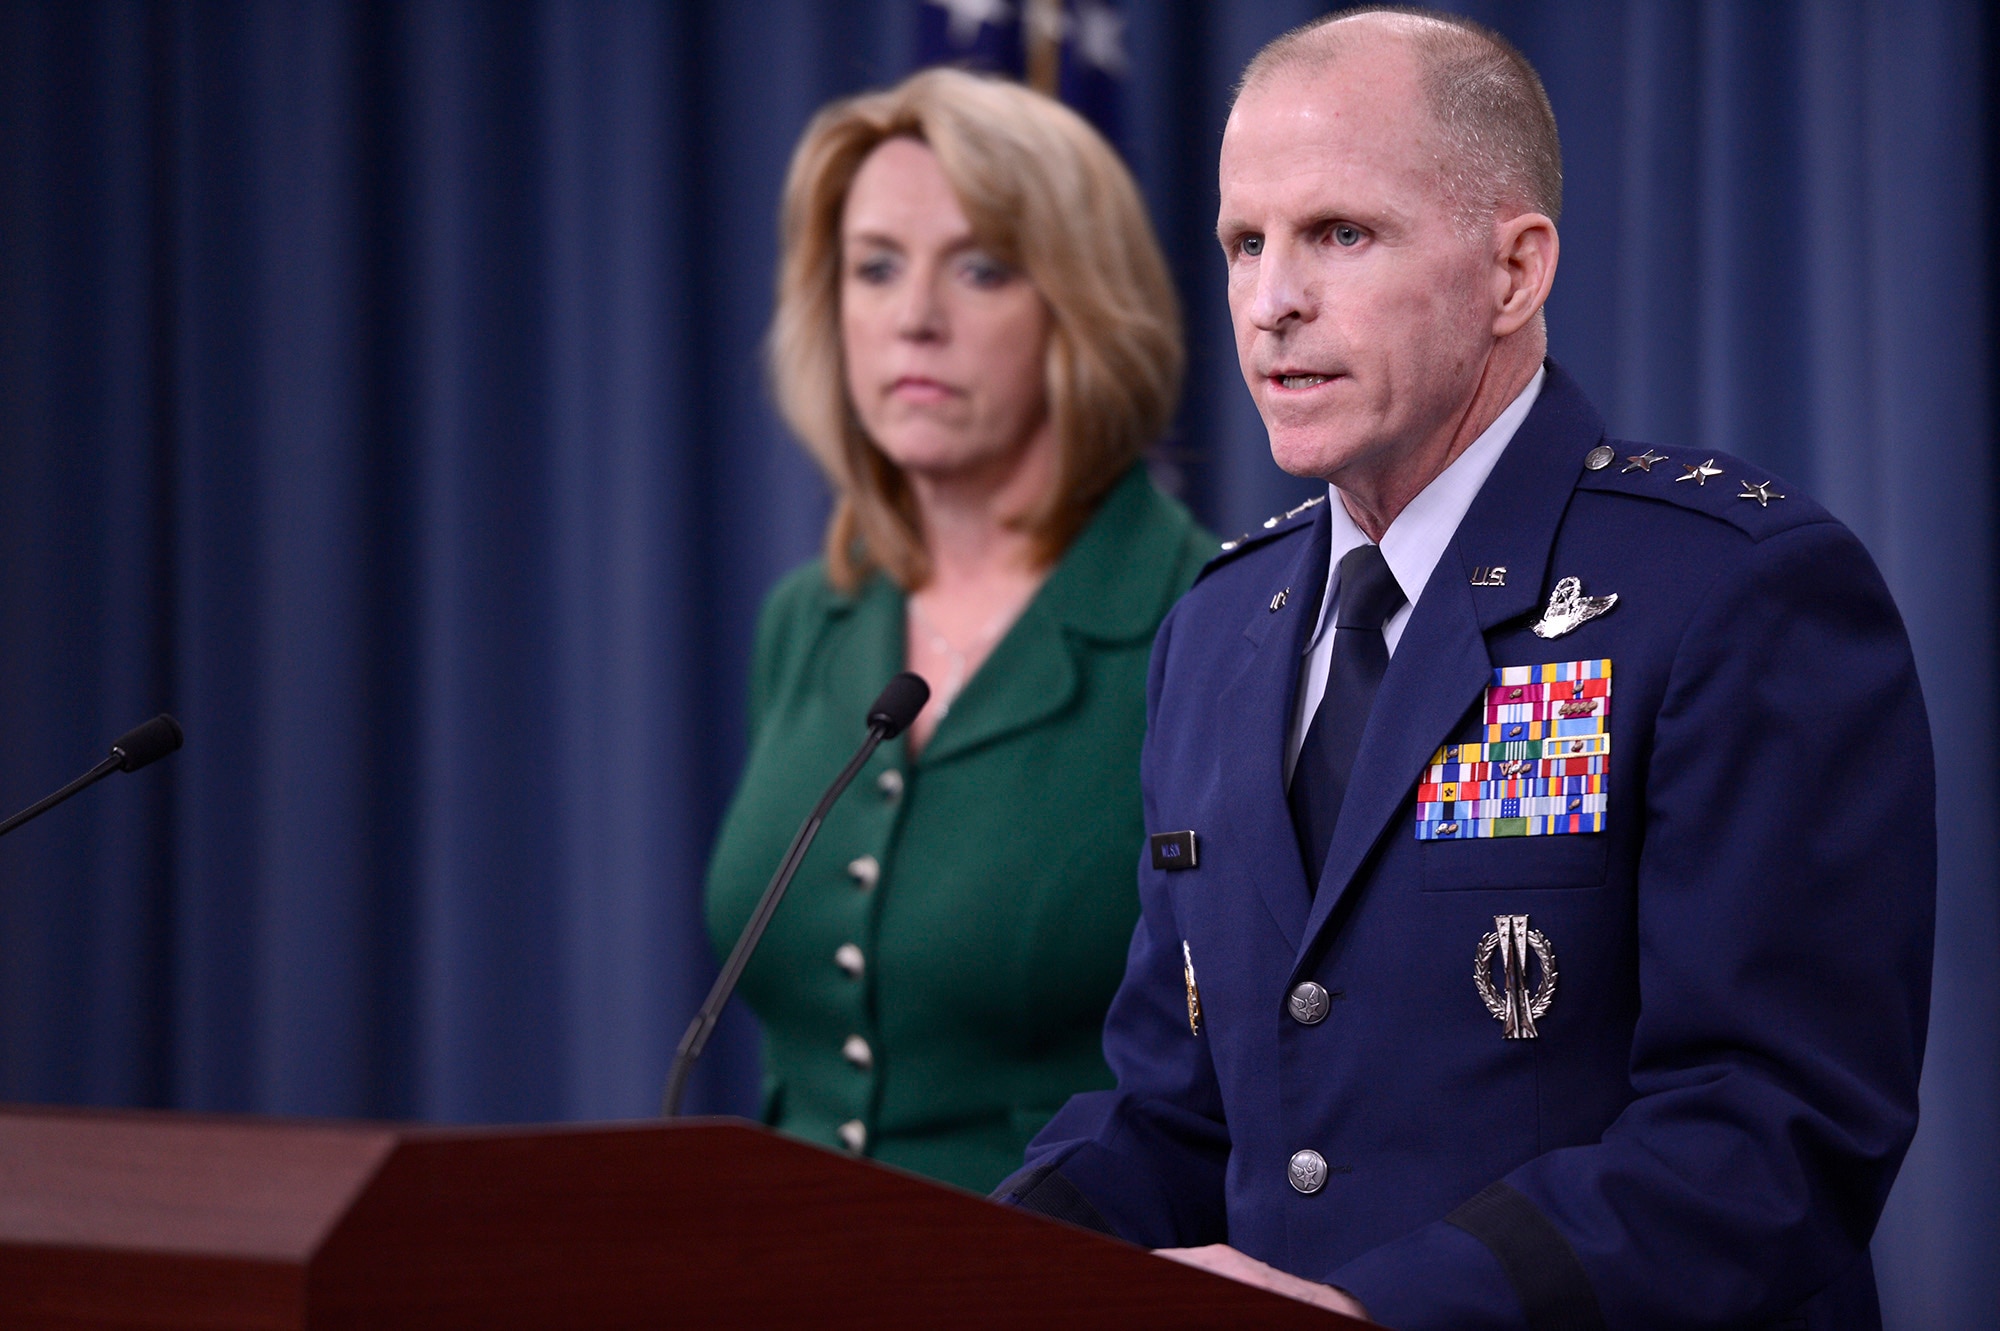 Lt. Gen Stephen Wilson, commander of Global Strike Command, and Secretary of the Air Force Deborah Lee James, provide an update, Jan. 30, 2014, in the Pentagon, on the investigation of compromised test materials at Malmstrom Air Force Base, Mont.  During the press briefing, James and Wilson talked about the steps the Air Force and Global Strike Command are taking to address the integrity failure by some officers and measures to address systemic issues affecting the ICBM crew force.  (U.S. Air Force photo/Scott M. Ash)